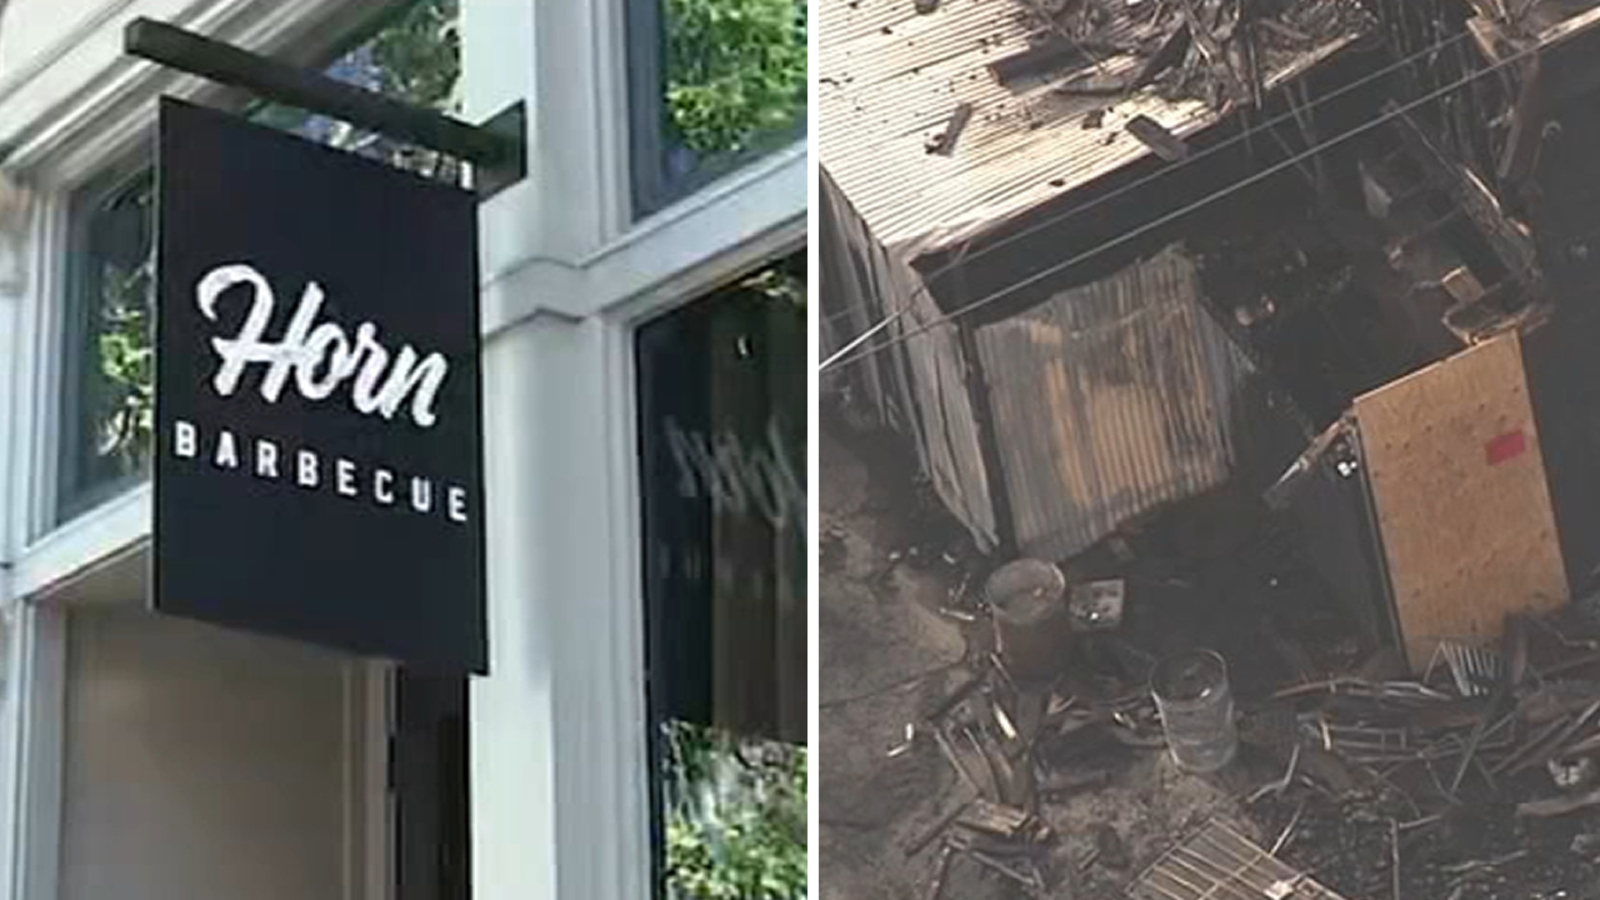 Horn Barbecue: Award-winning restaurant reopens at new location in Oakland following closure from devastating fire 5 months ago [Video]